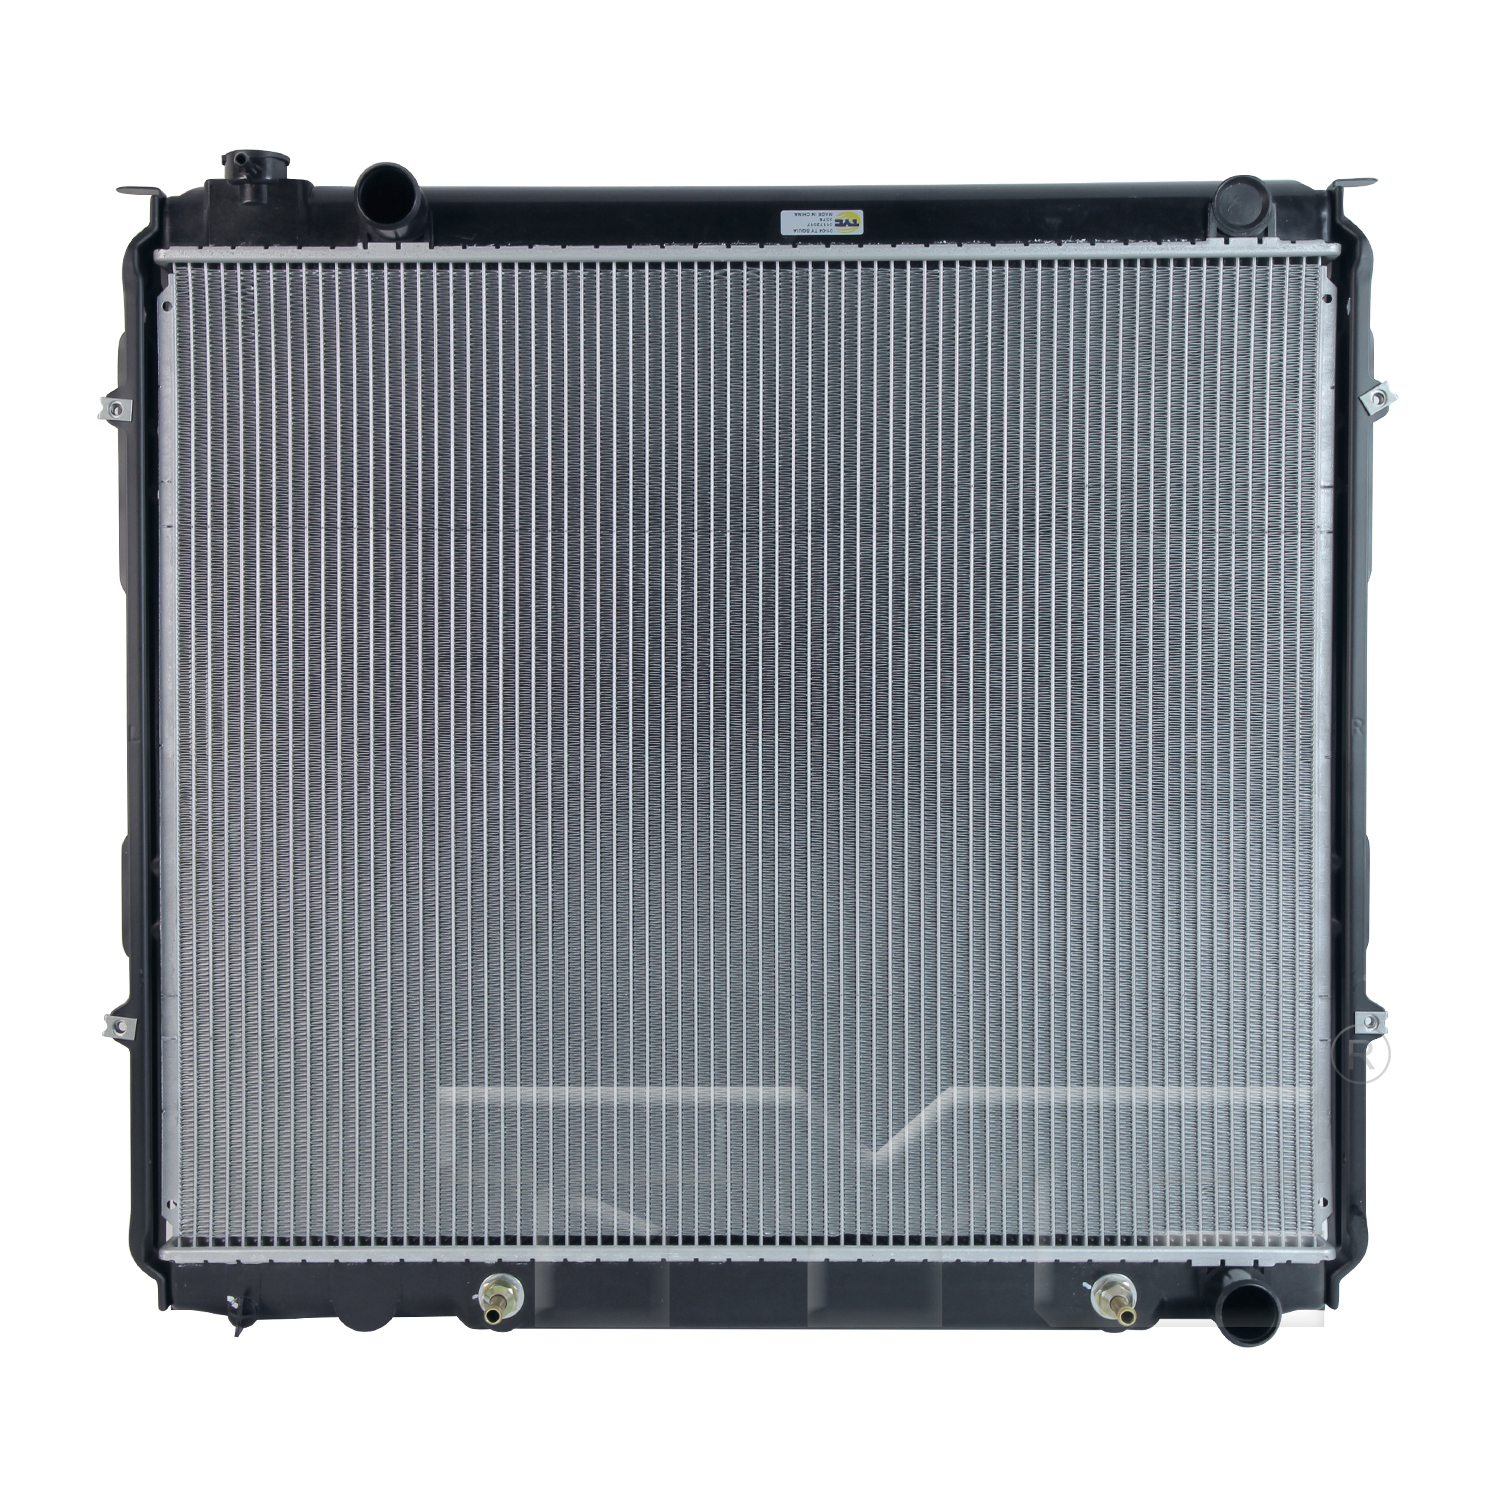 Aftermarket RADIATORS for TOYOTA - SEQUOIA, SEQUOIA,01-04,Radiator assembly